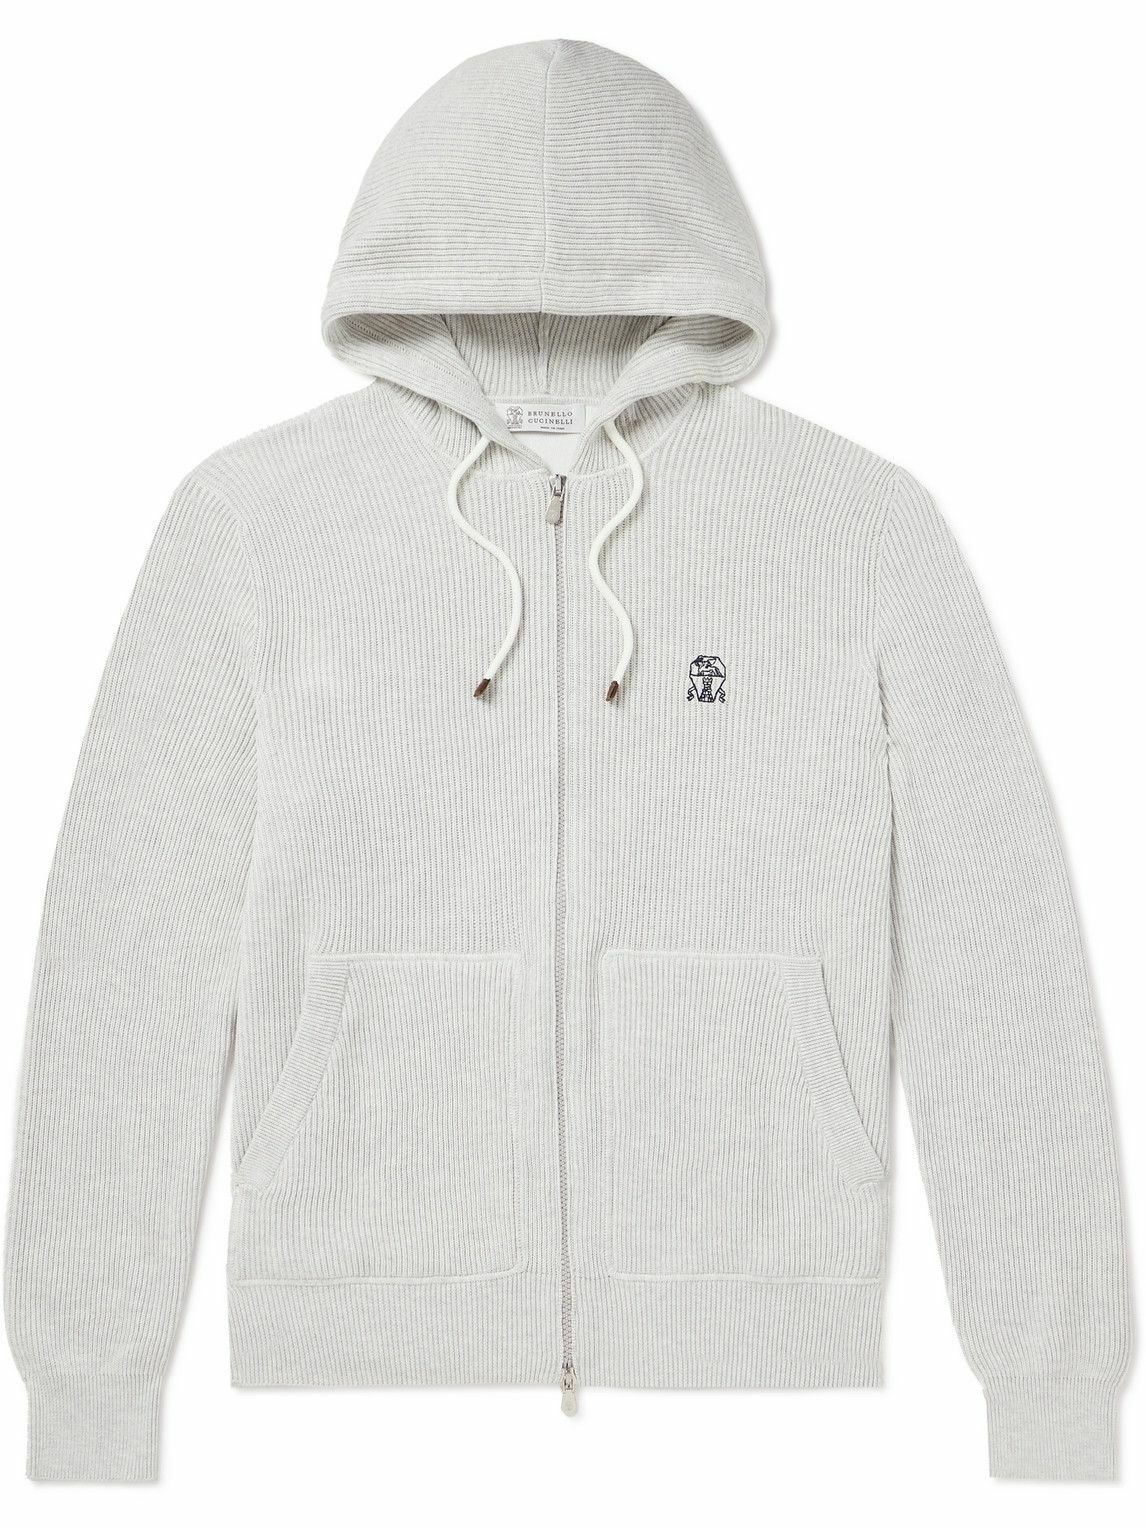 Photo: Brunello Cucinelli - Logo-Embroidered Ribbed Cotton Zip-Up Hoodie - Gray